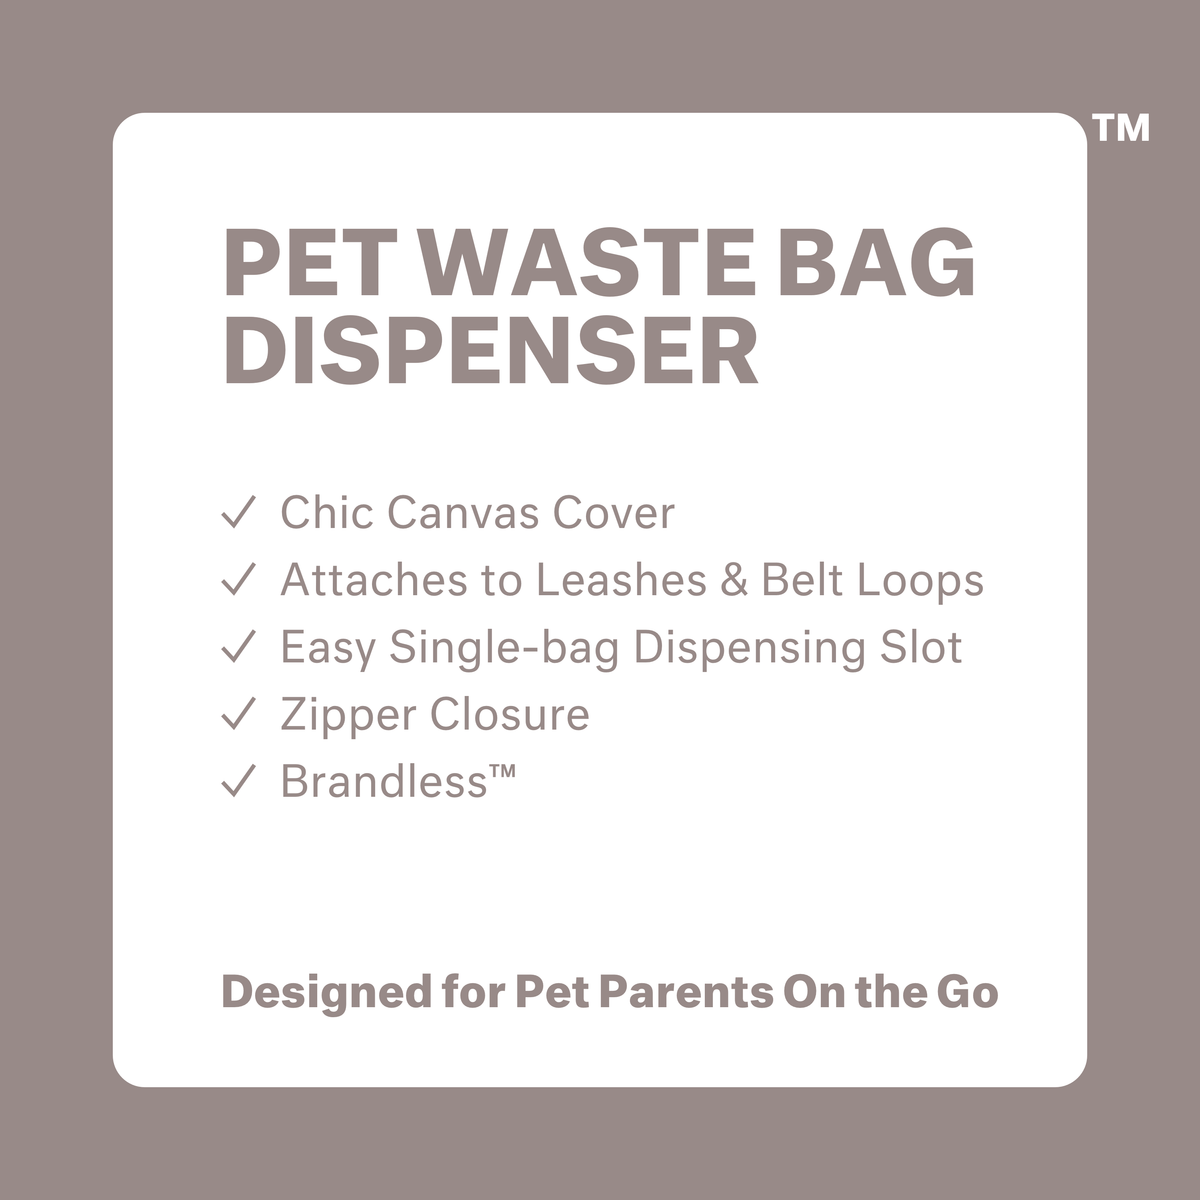 Pet Waste Bag Dispenser: chic canvas cover, attaches to leashes and belt loops, easy single bag dispensing slot, zipper closure, brandless. Designed for pet parents on the go.